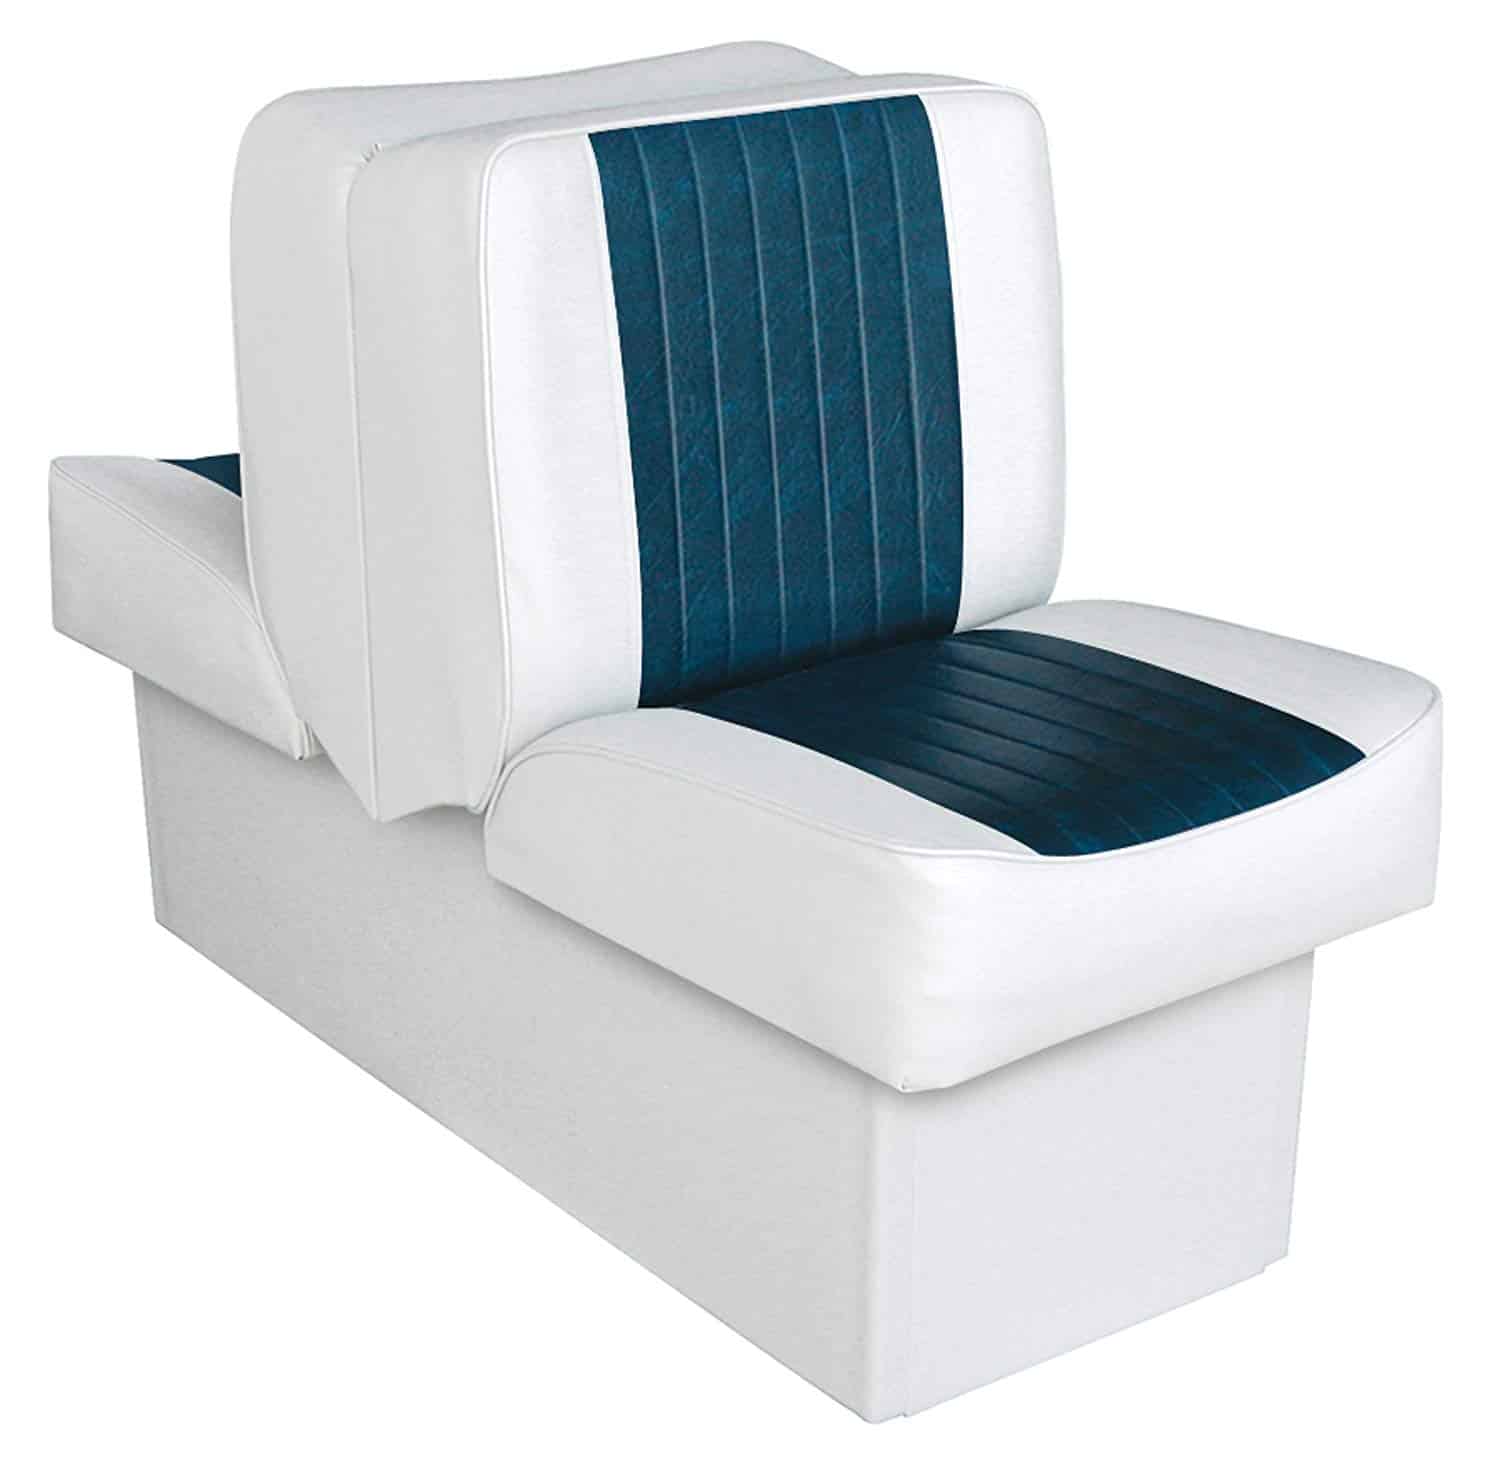 Wise Seating Low Back Boat Seat, White